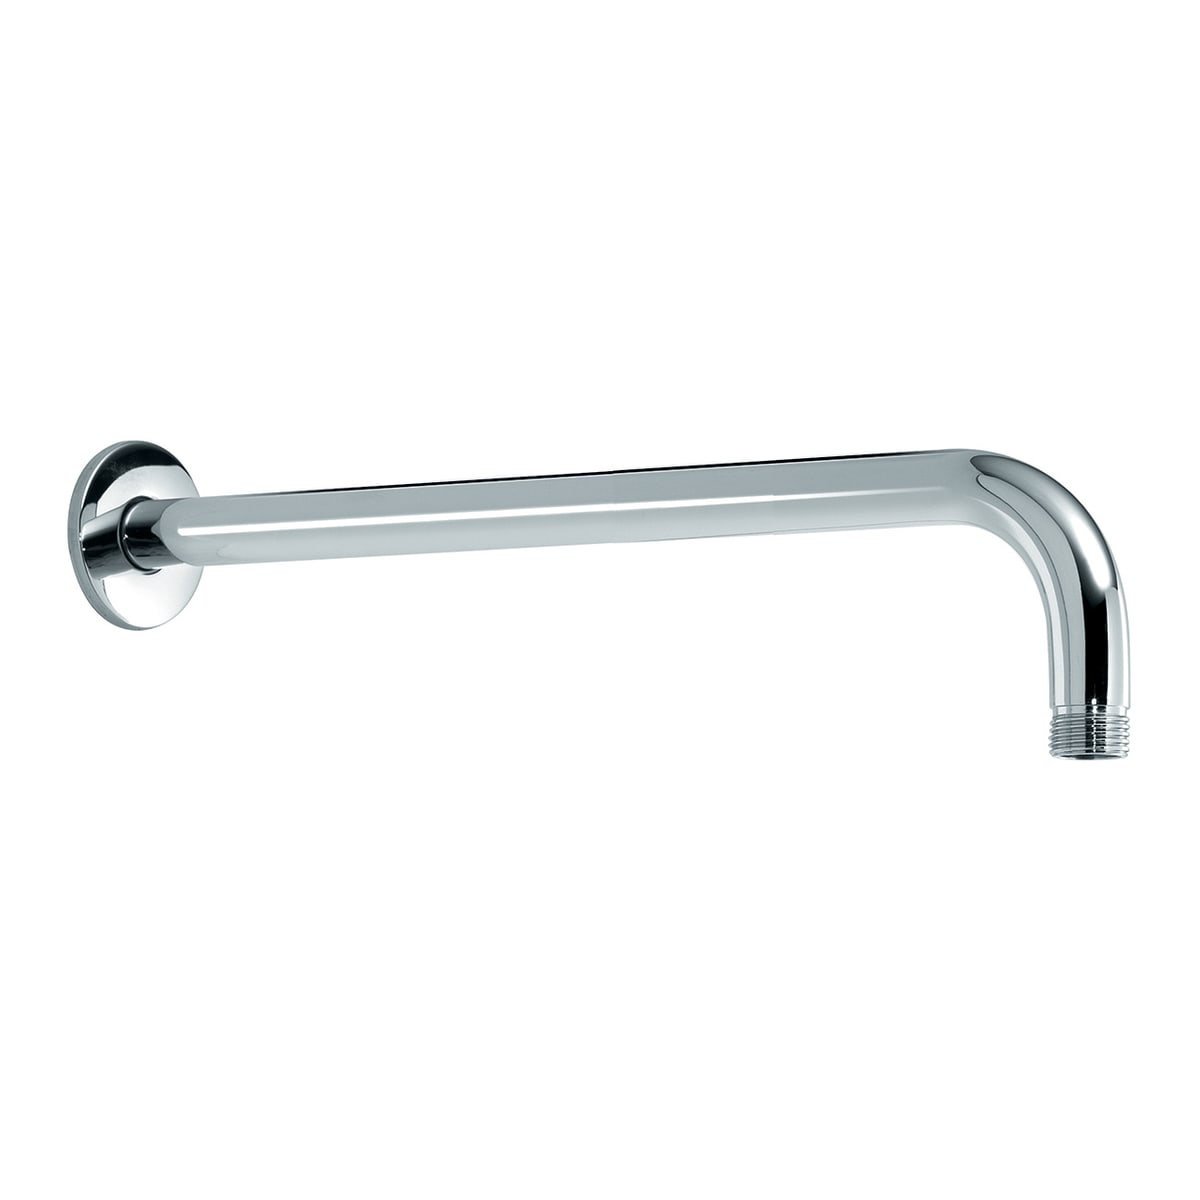 CURVED WALL SHOWER ARM 30 CM LENGTH